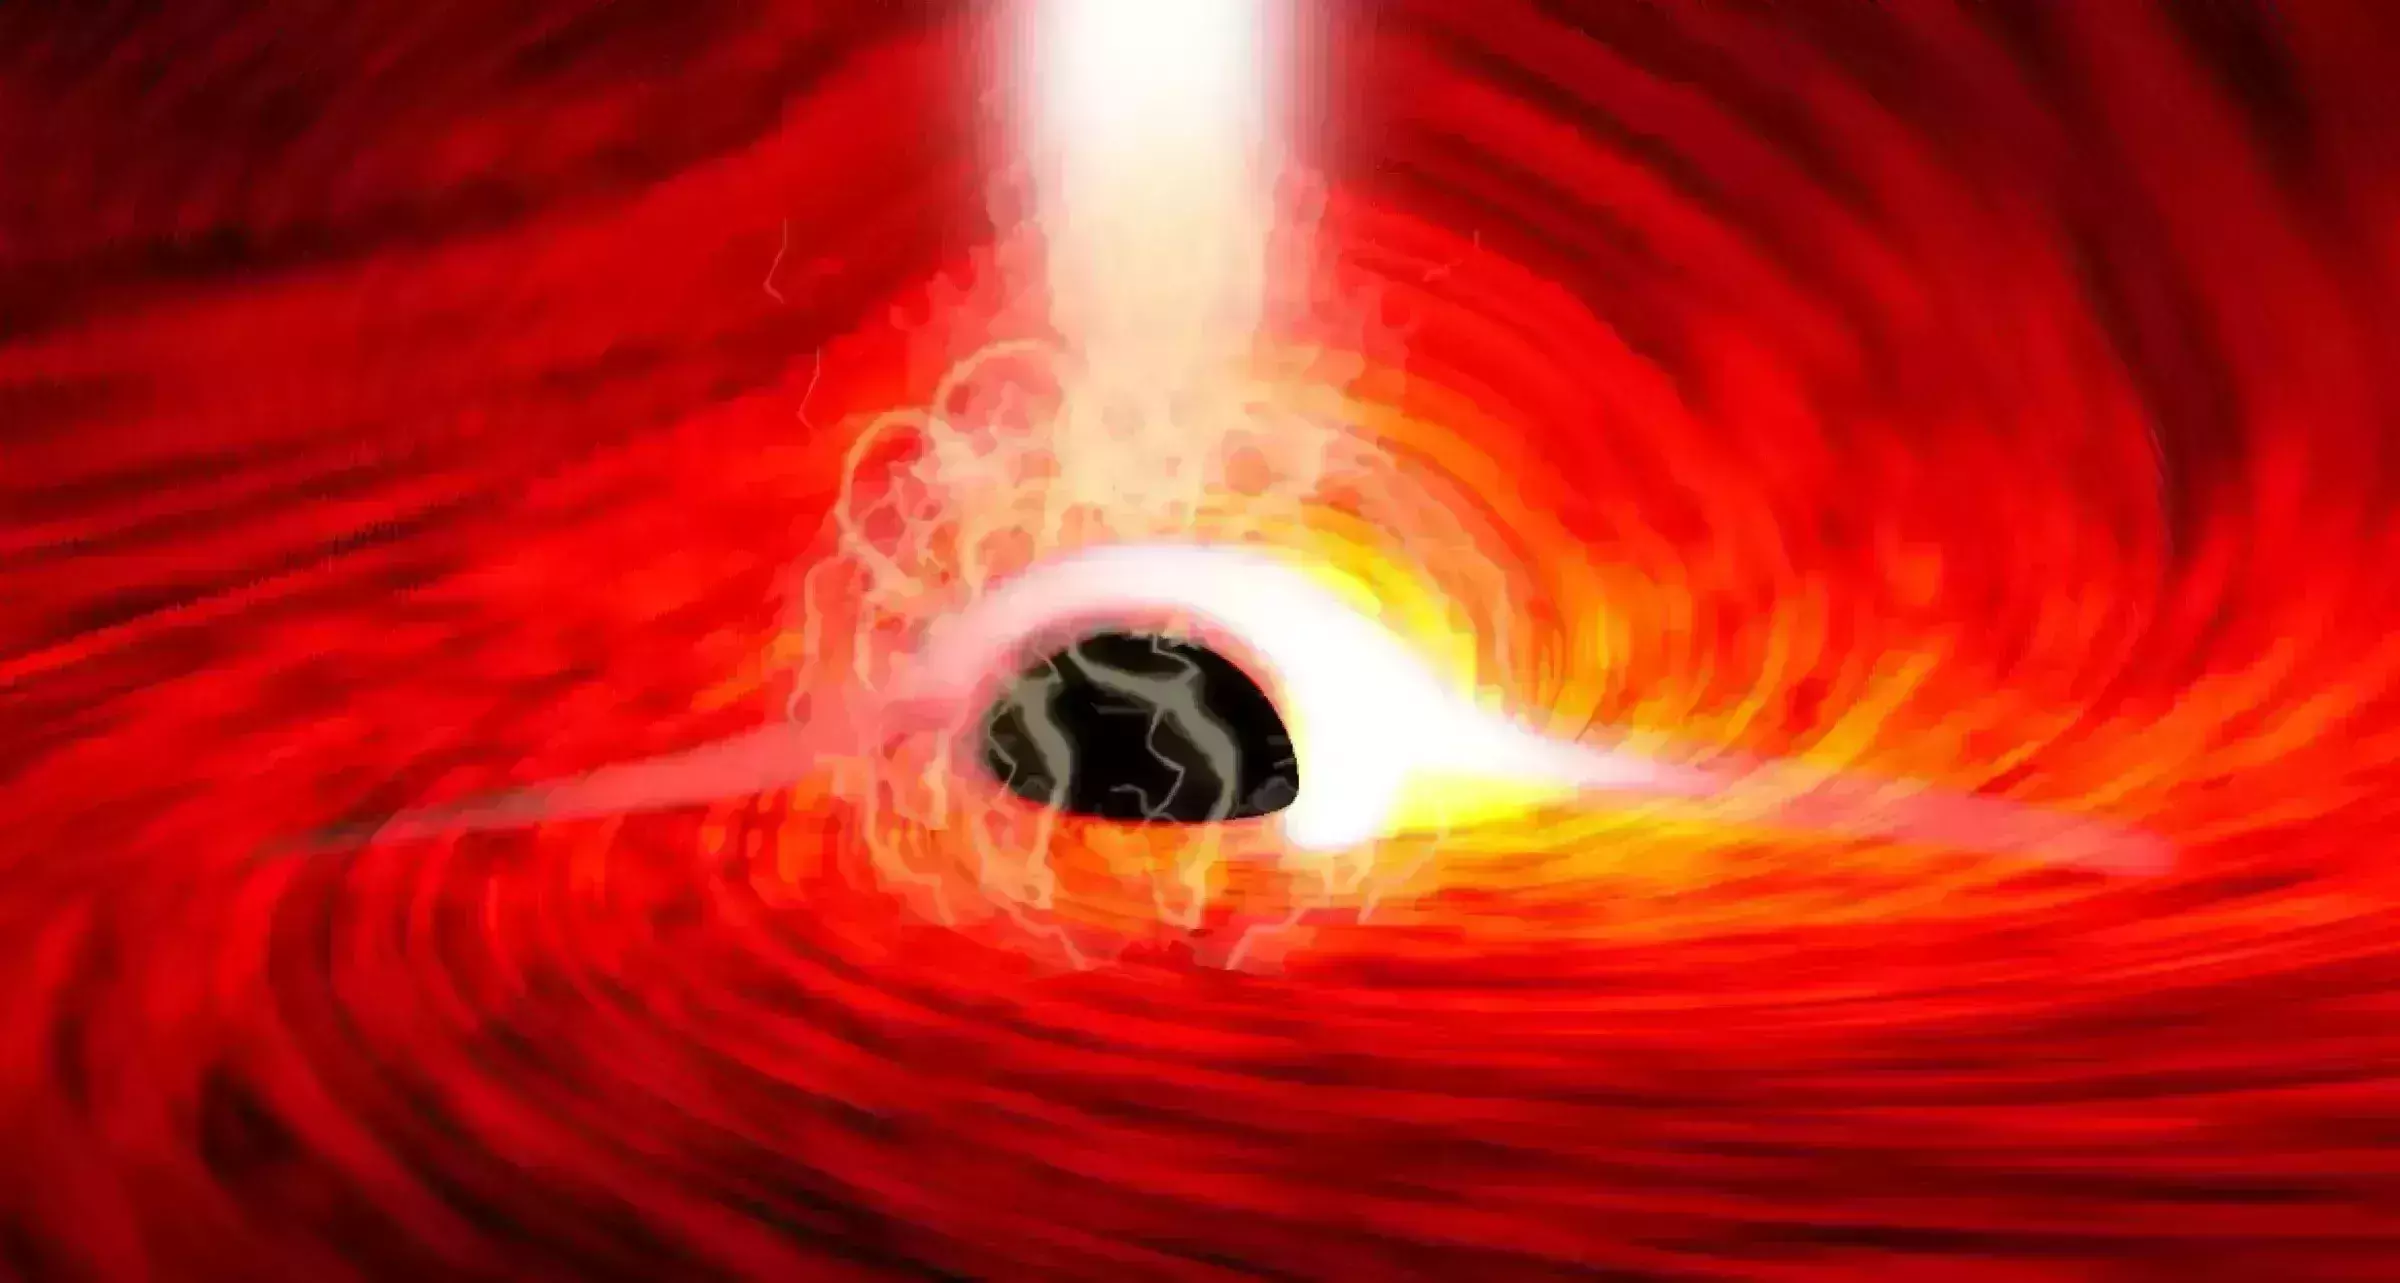 Astronomers detect light echoing from behind black hole for first time